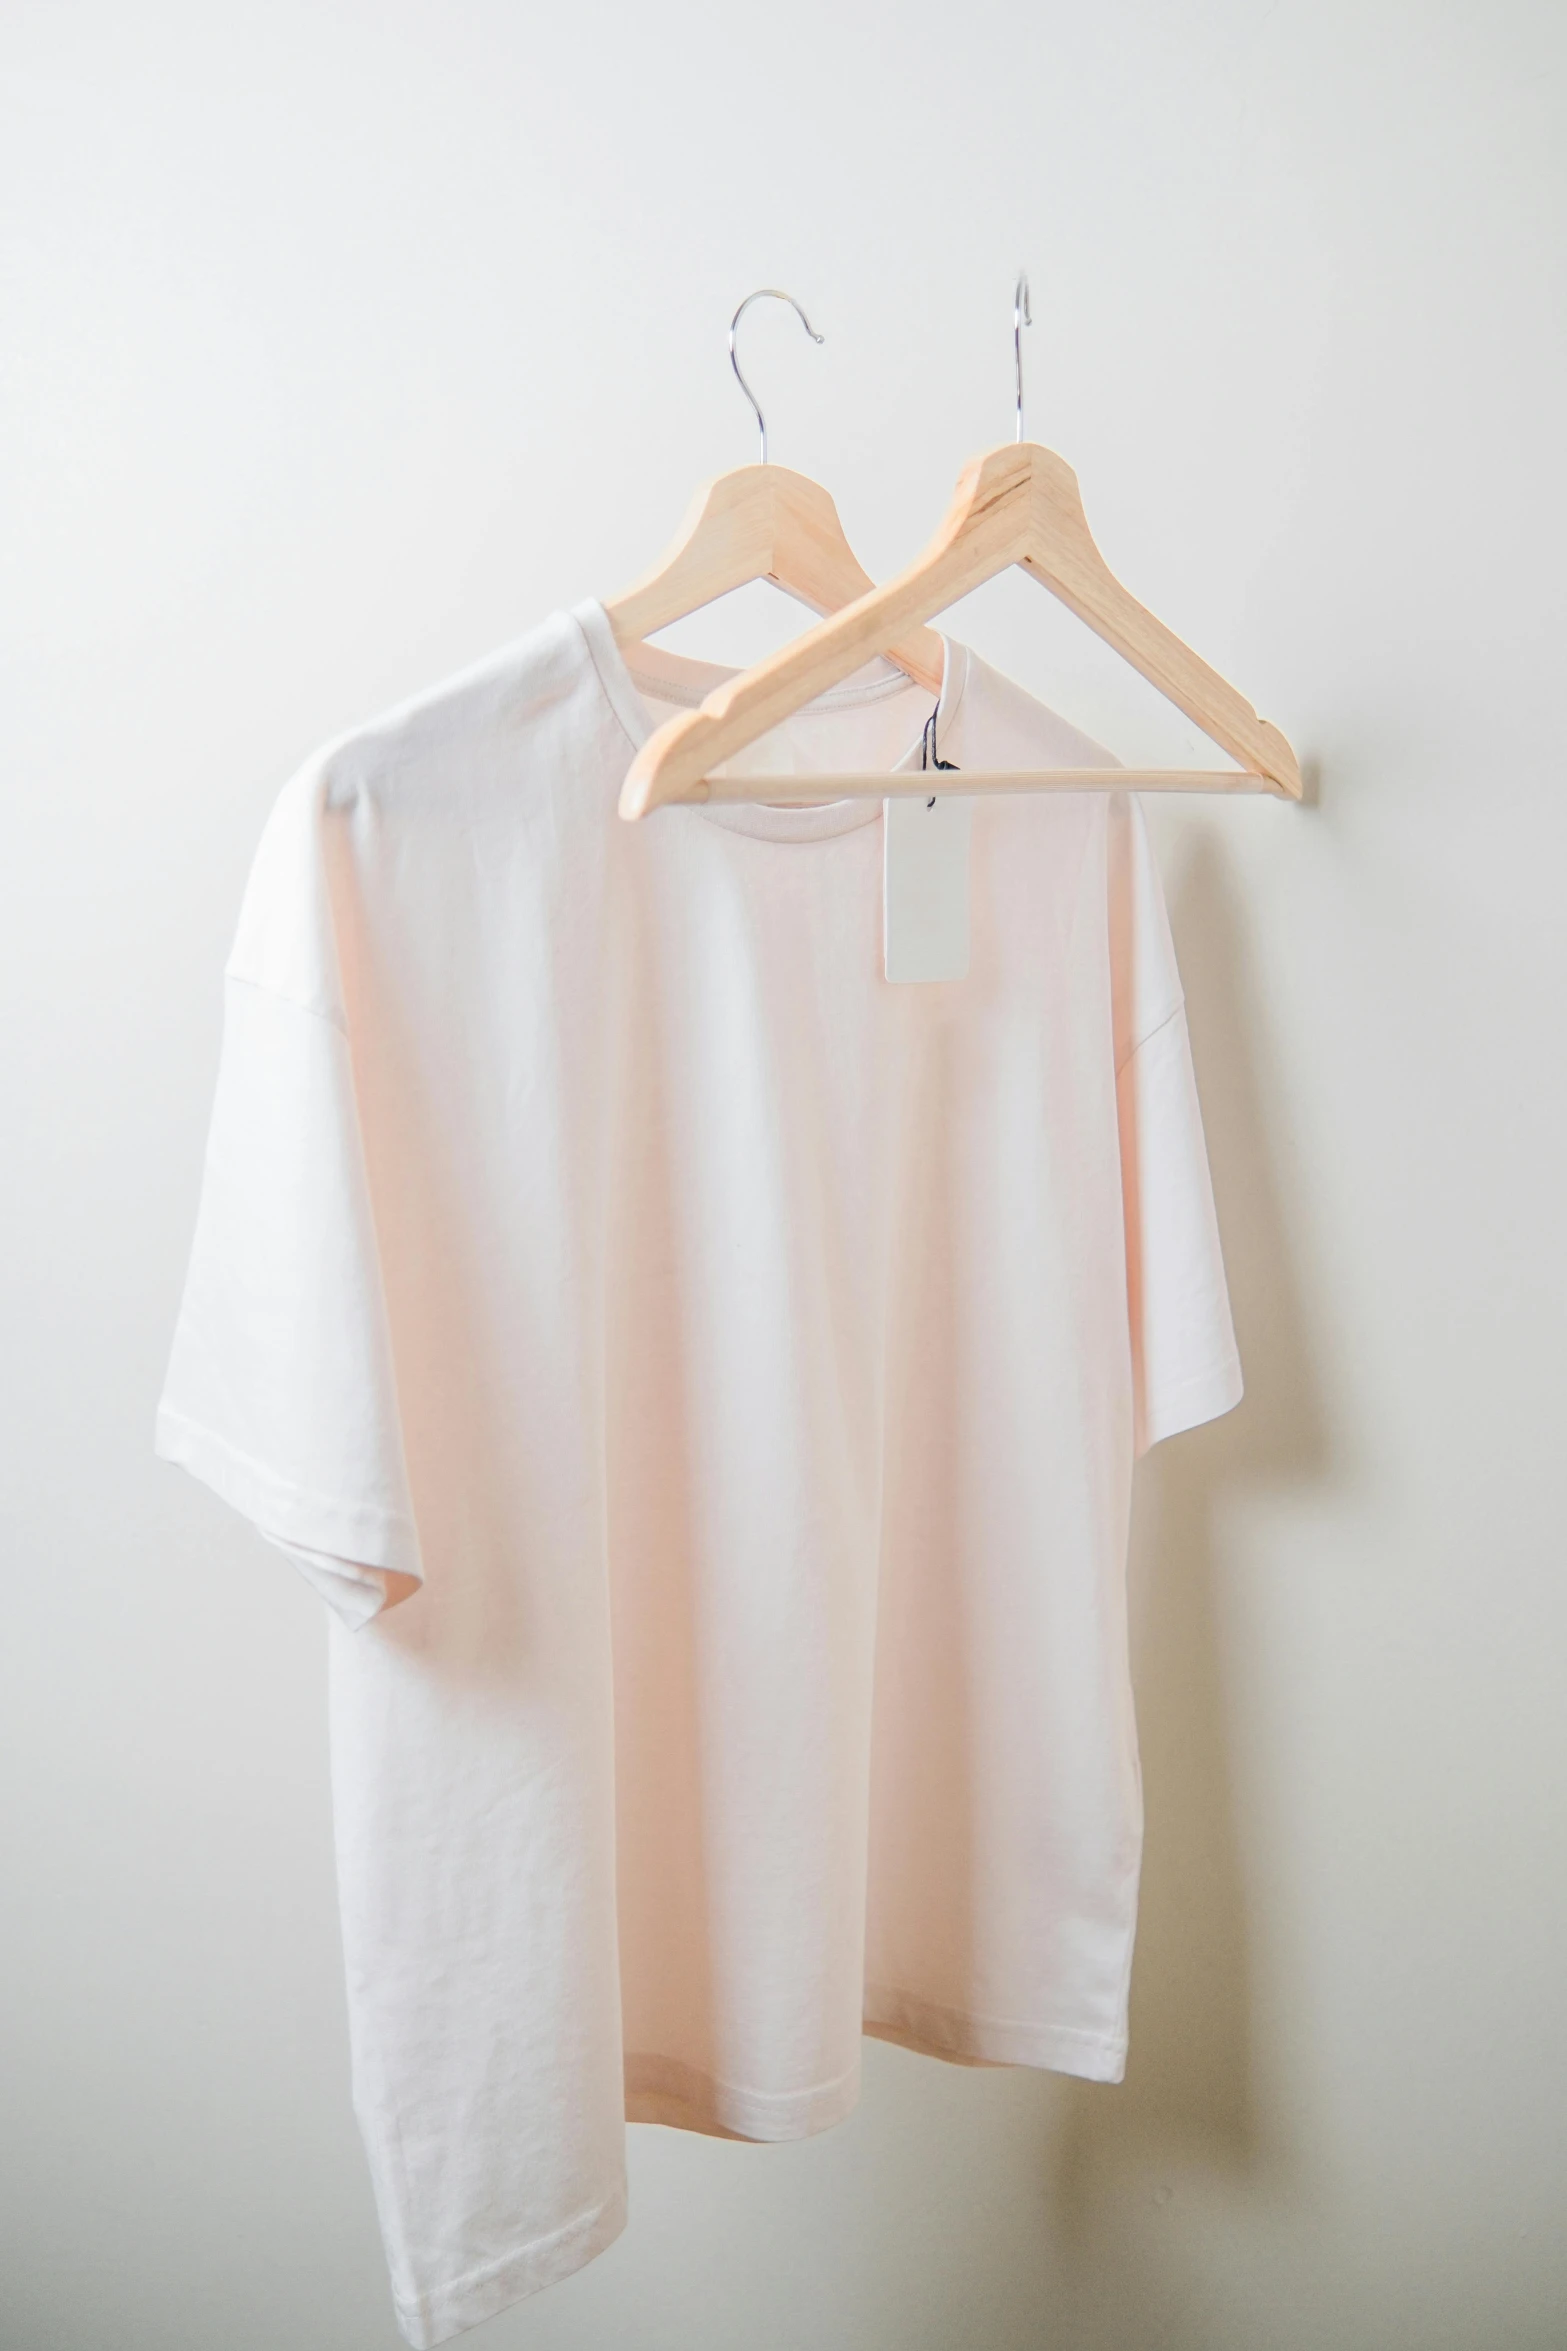 two shirts on a hanger and a t - shirt hanging